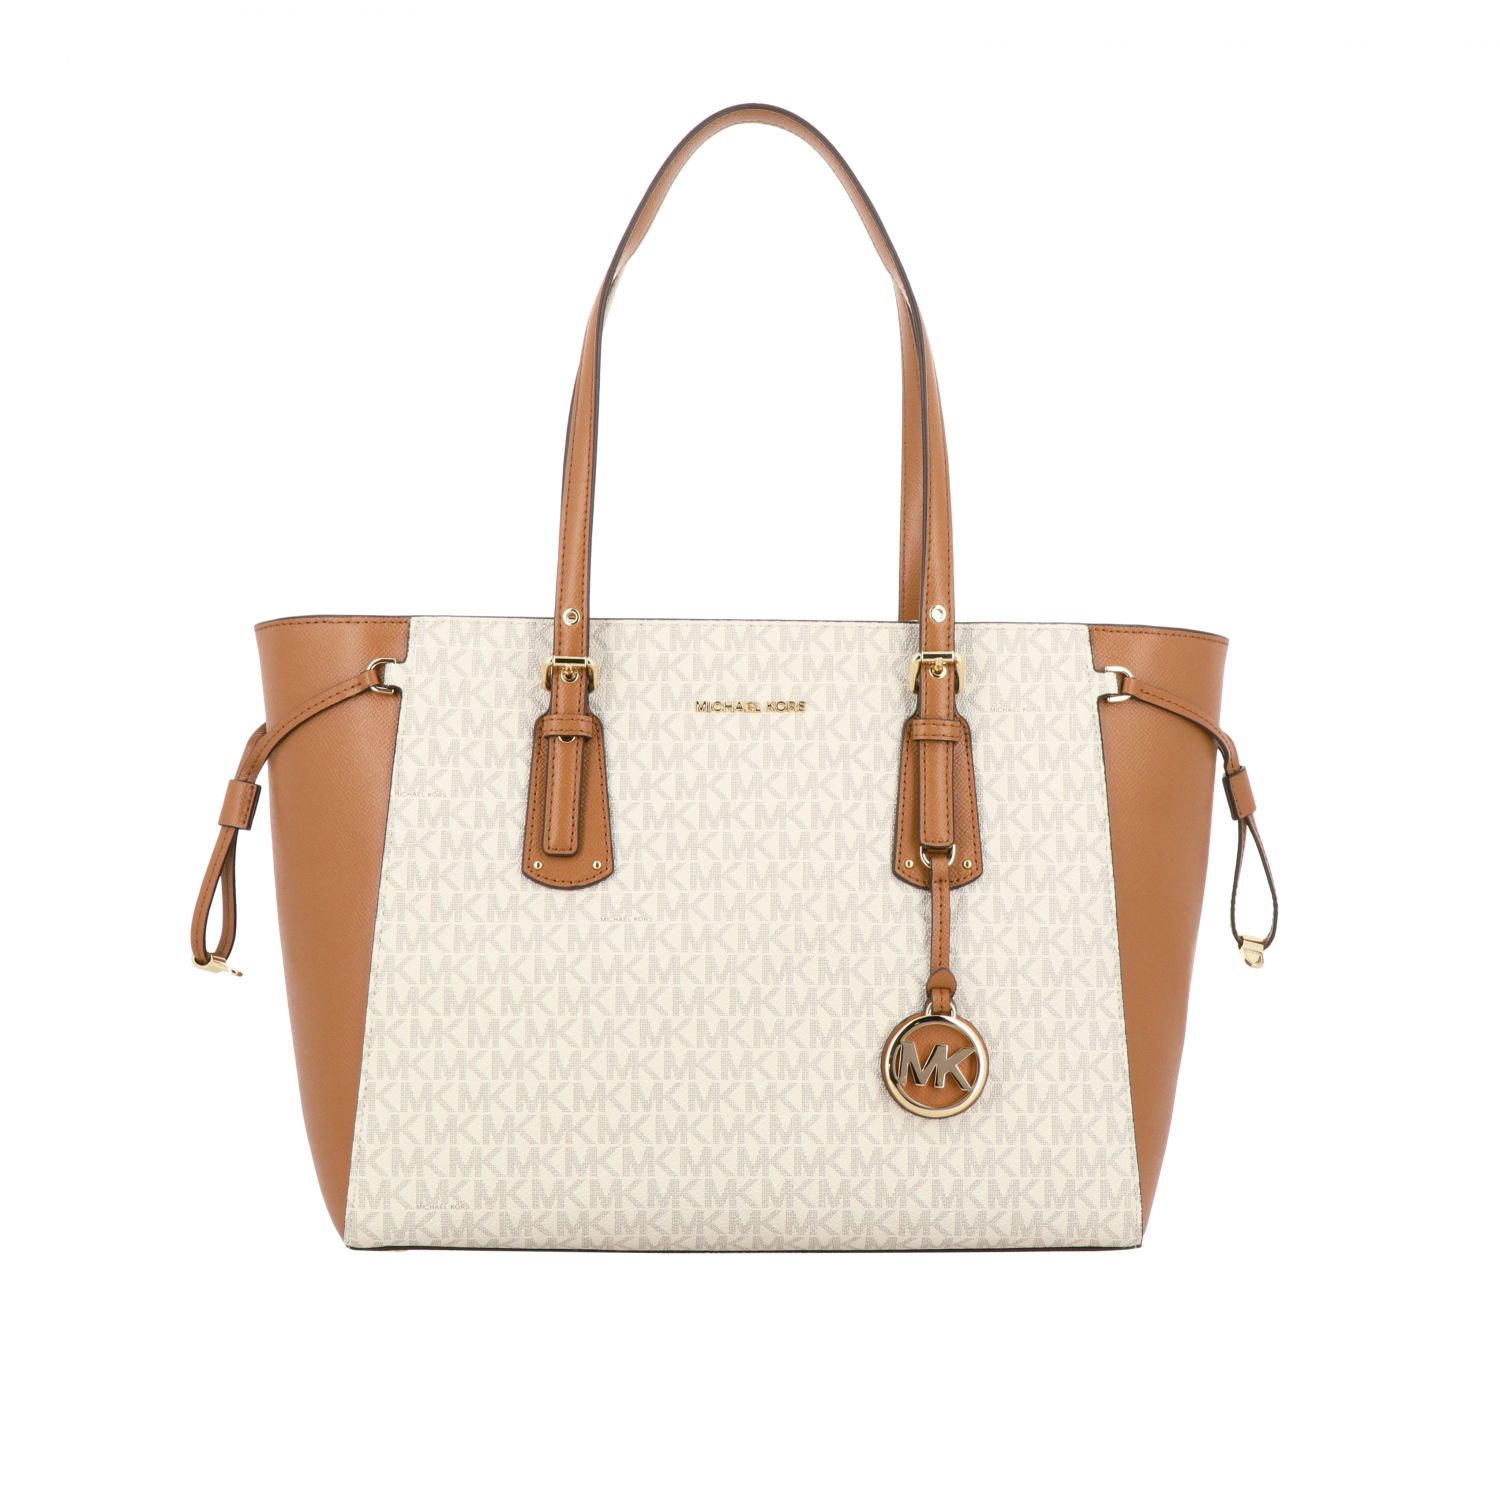 MICHAEL KORS: Voyager Michael bag with MK all over print - Beige